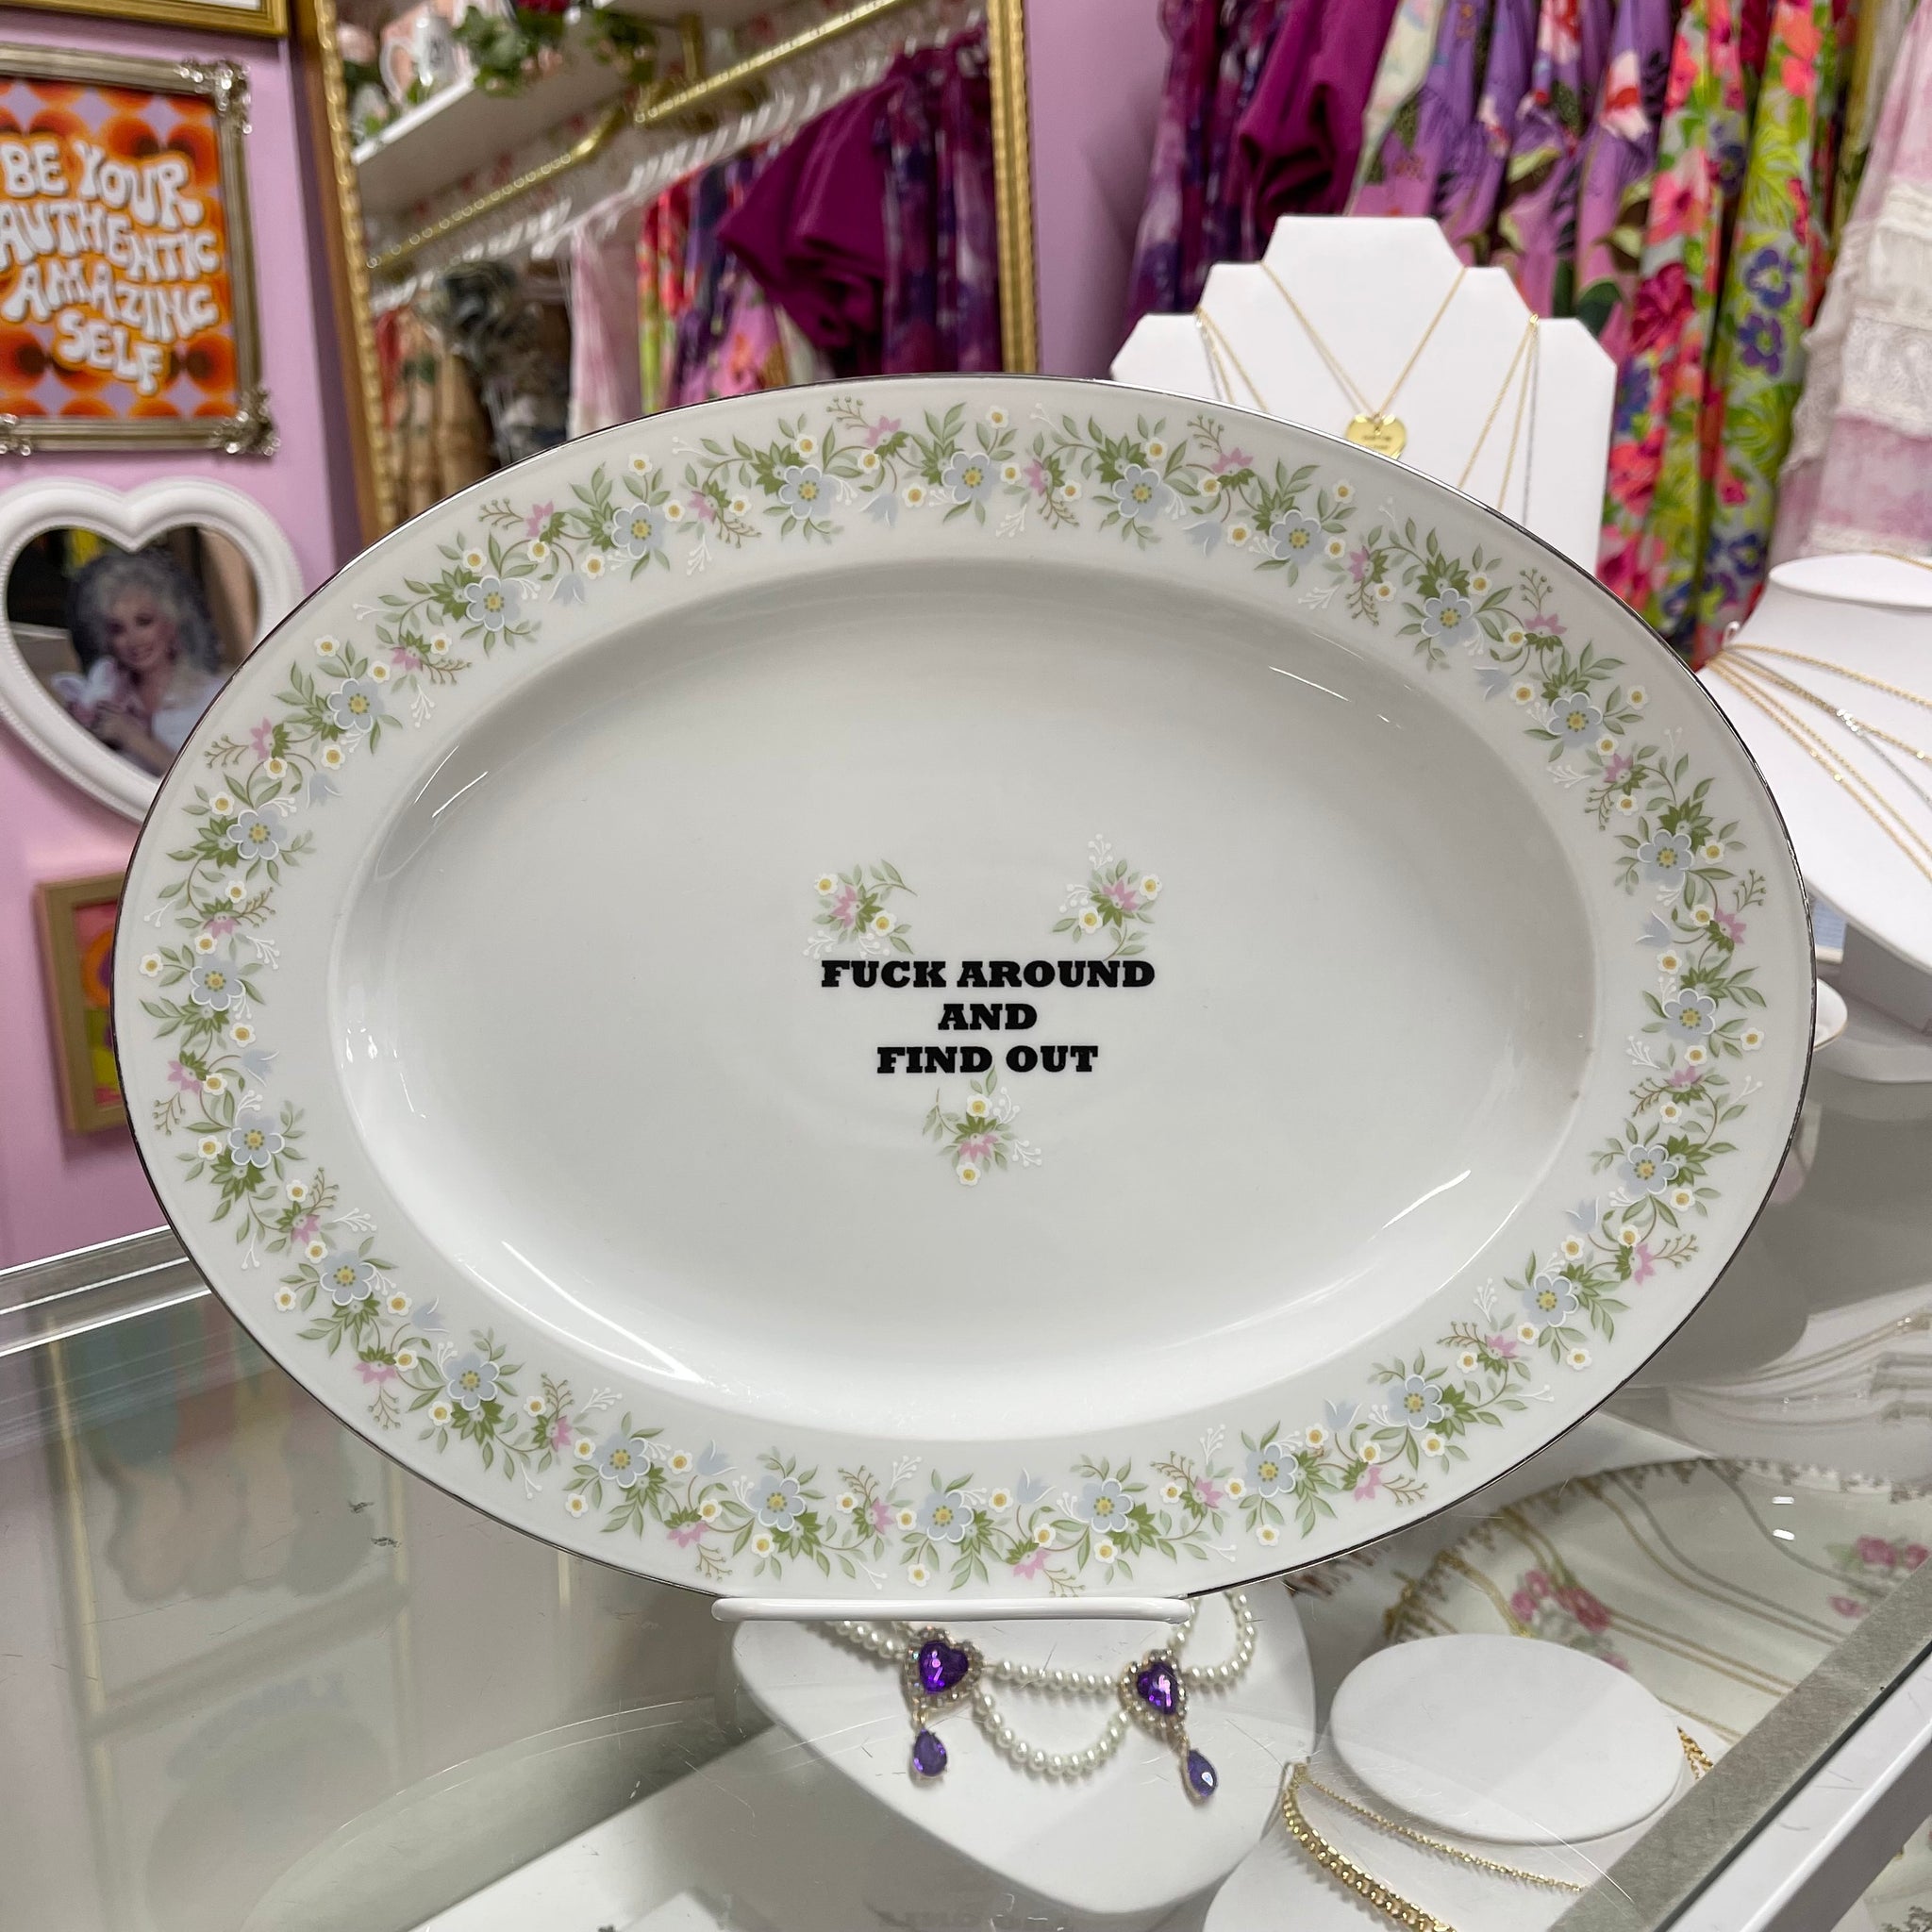 F Around And Find Out Vintage Platter